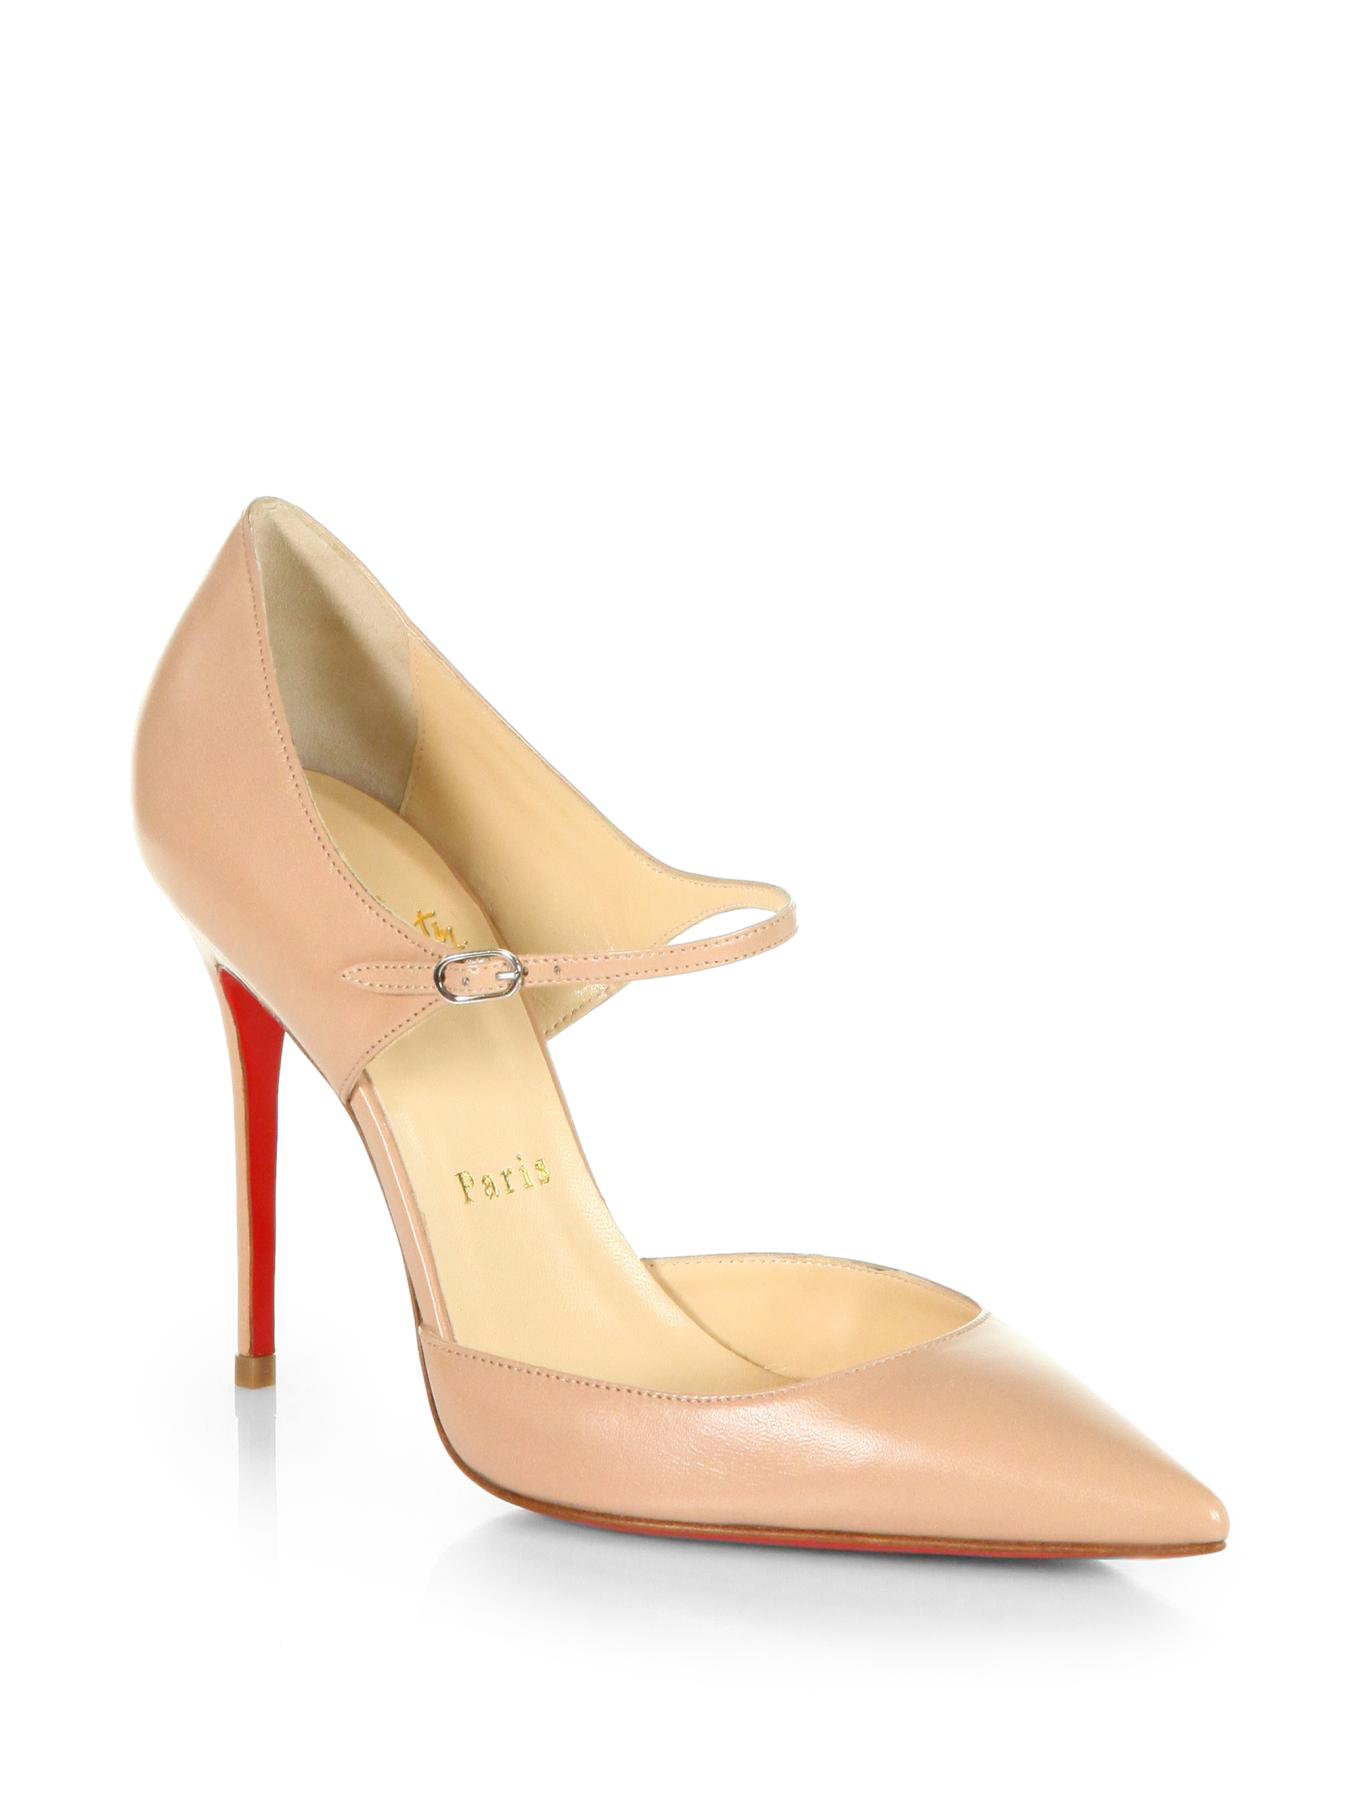 Artesur » louboutin patent leather Jane pumps Nude pointed toes